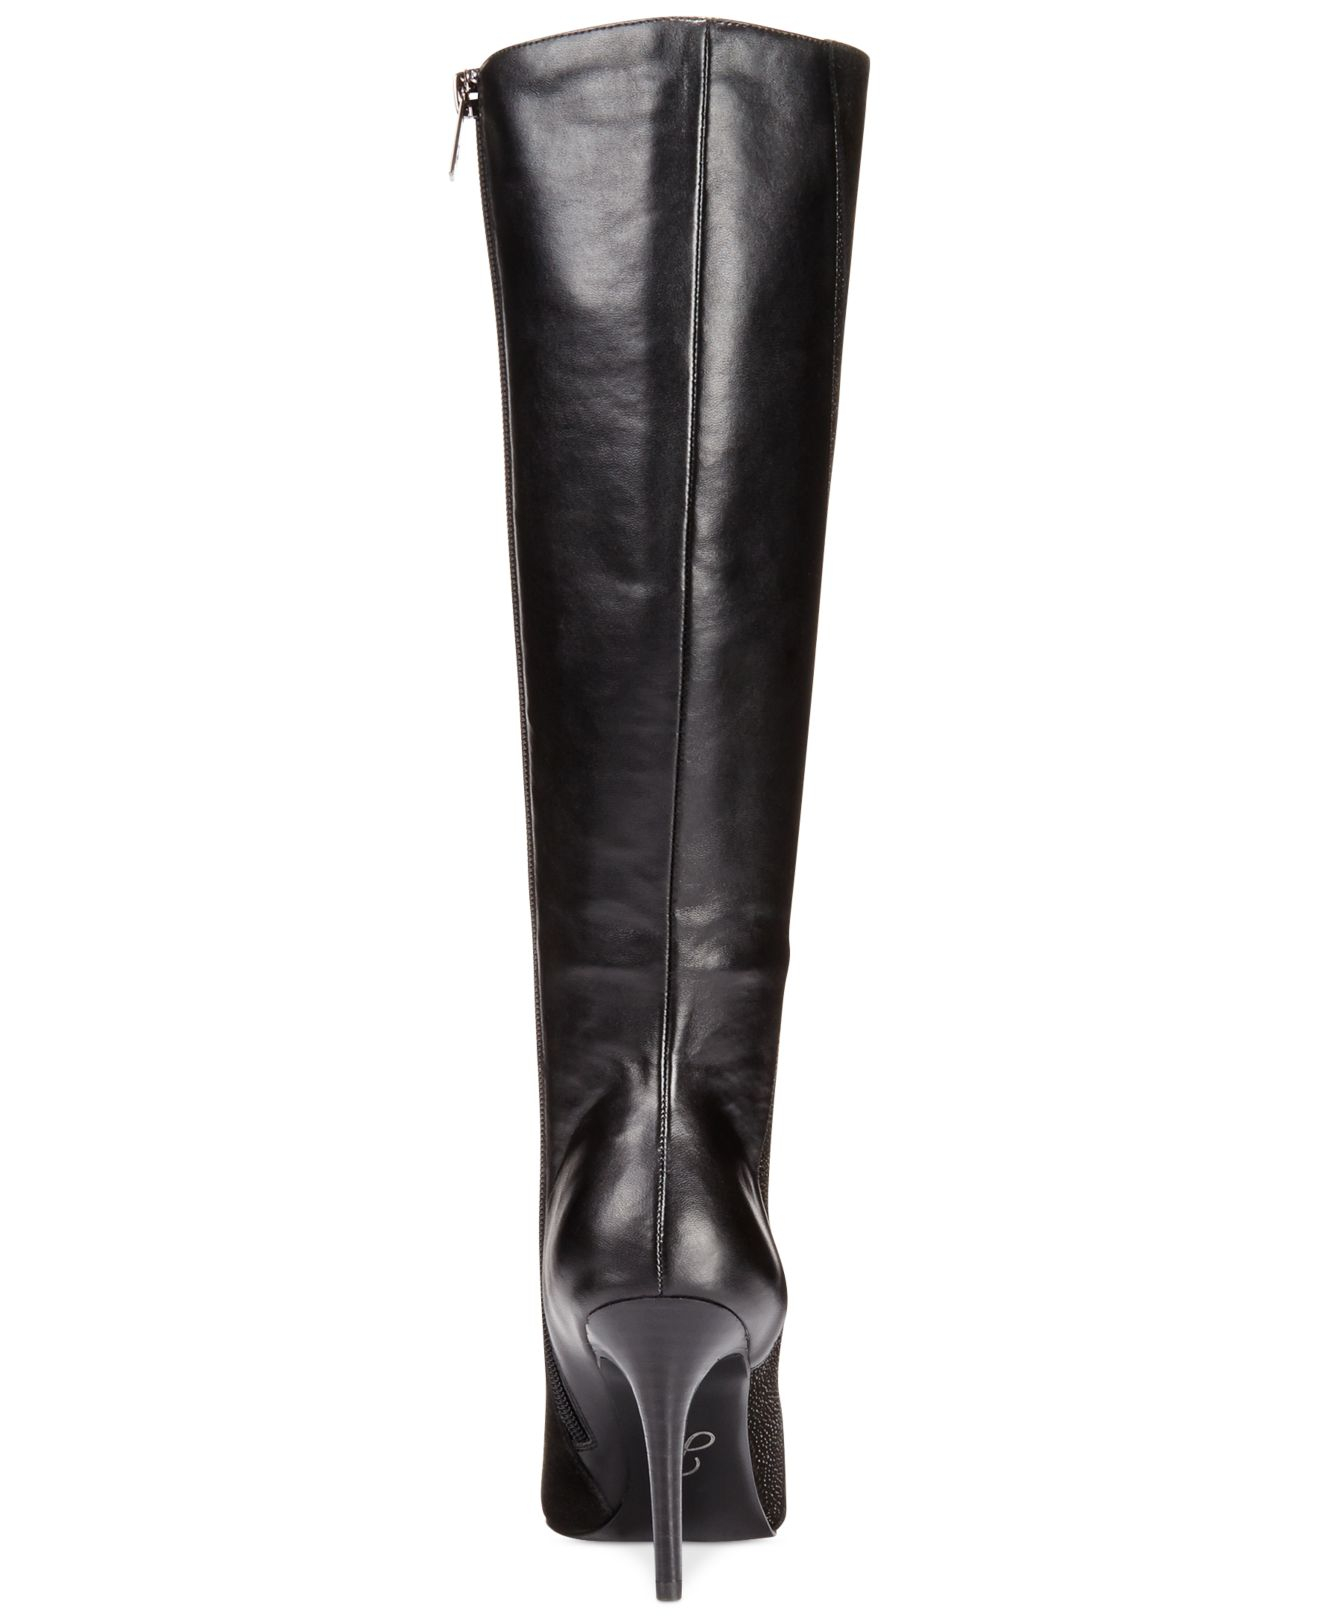 Lyst - Adrianna Papell Portia Tall Dress Boots in Black